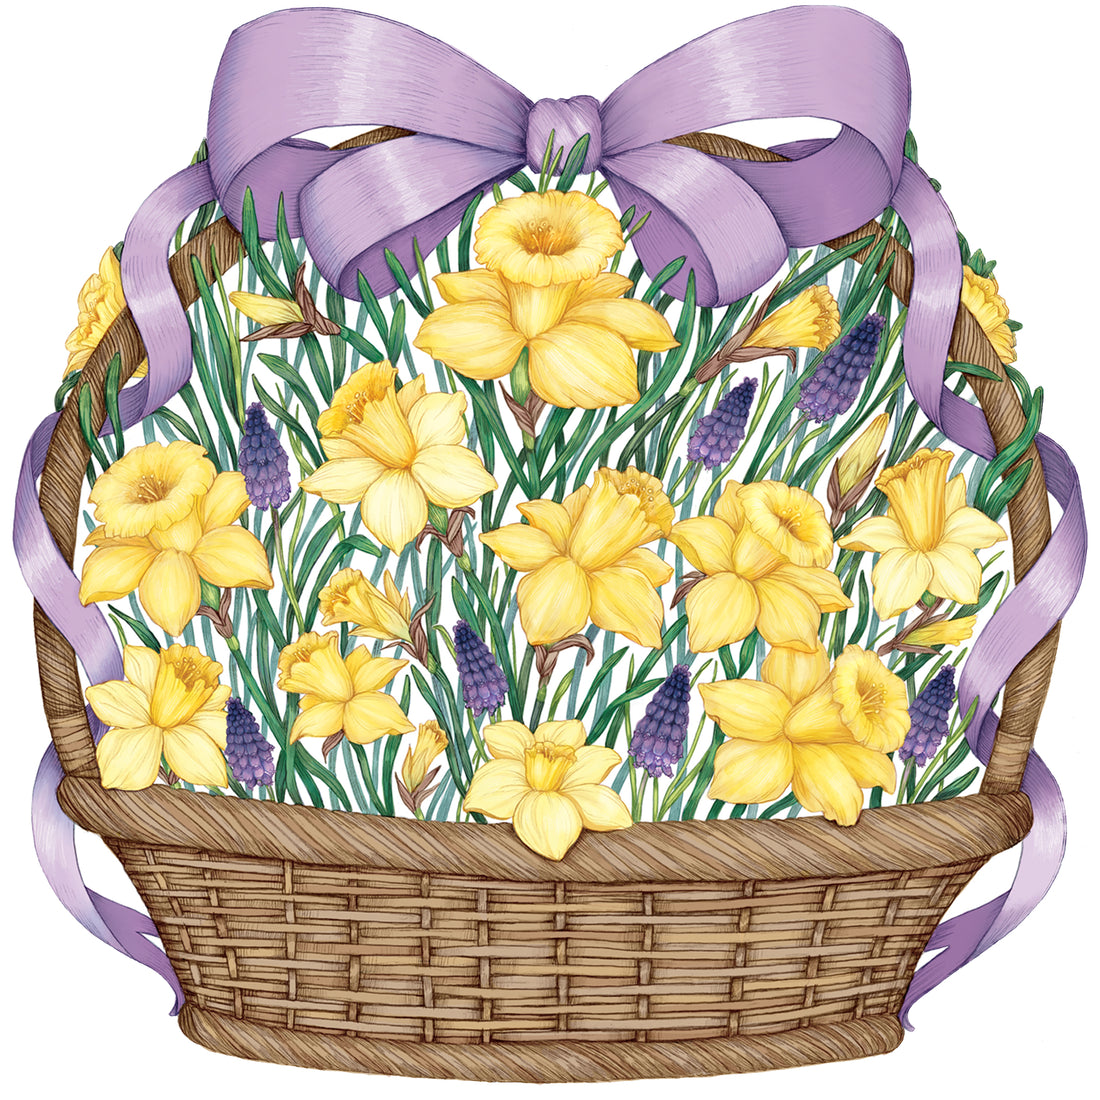 An illustrated wicker basket with a big purple ribbon bow on the handle, full of vibrant yellow daffodils and purple blooms with green foliage, on a white background.